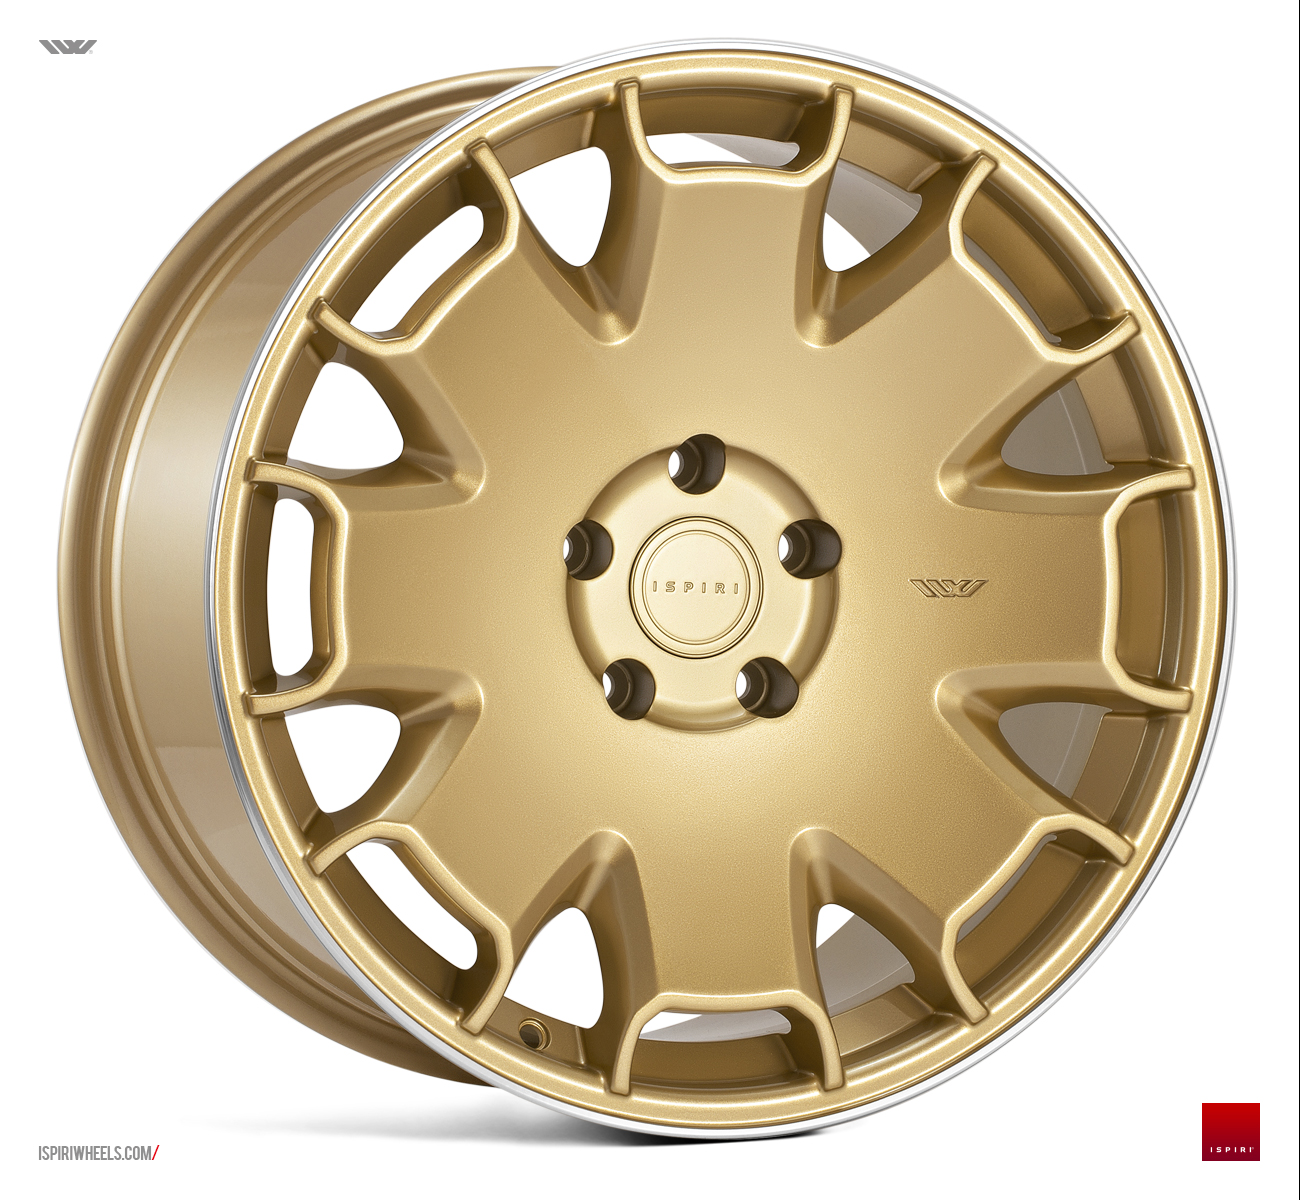 NEW 18  ISPIRI CSR2 ALLOY WHEELS IN VINTAGE GOLD WITH POLISHED LIP et42 42